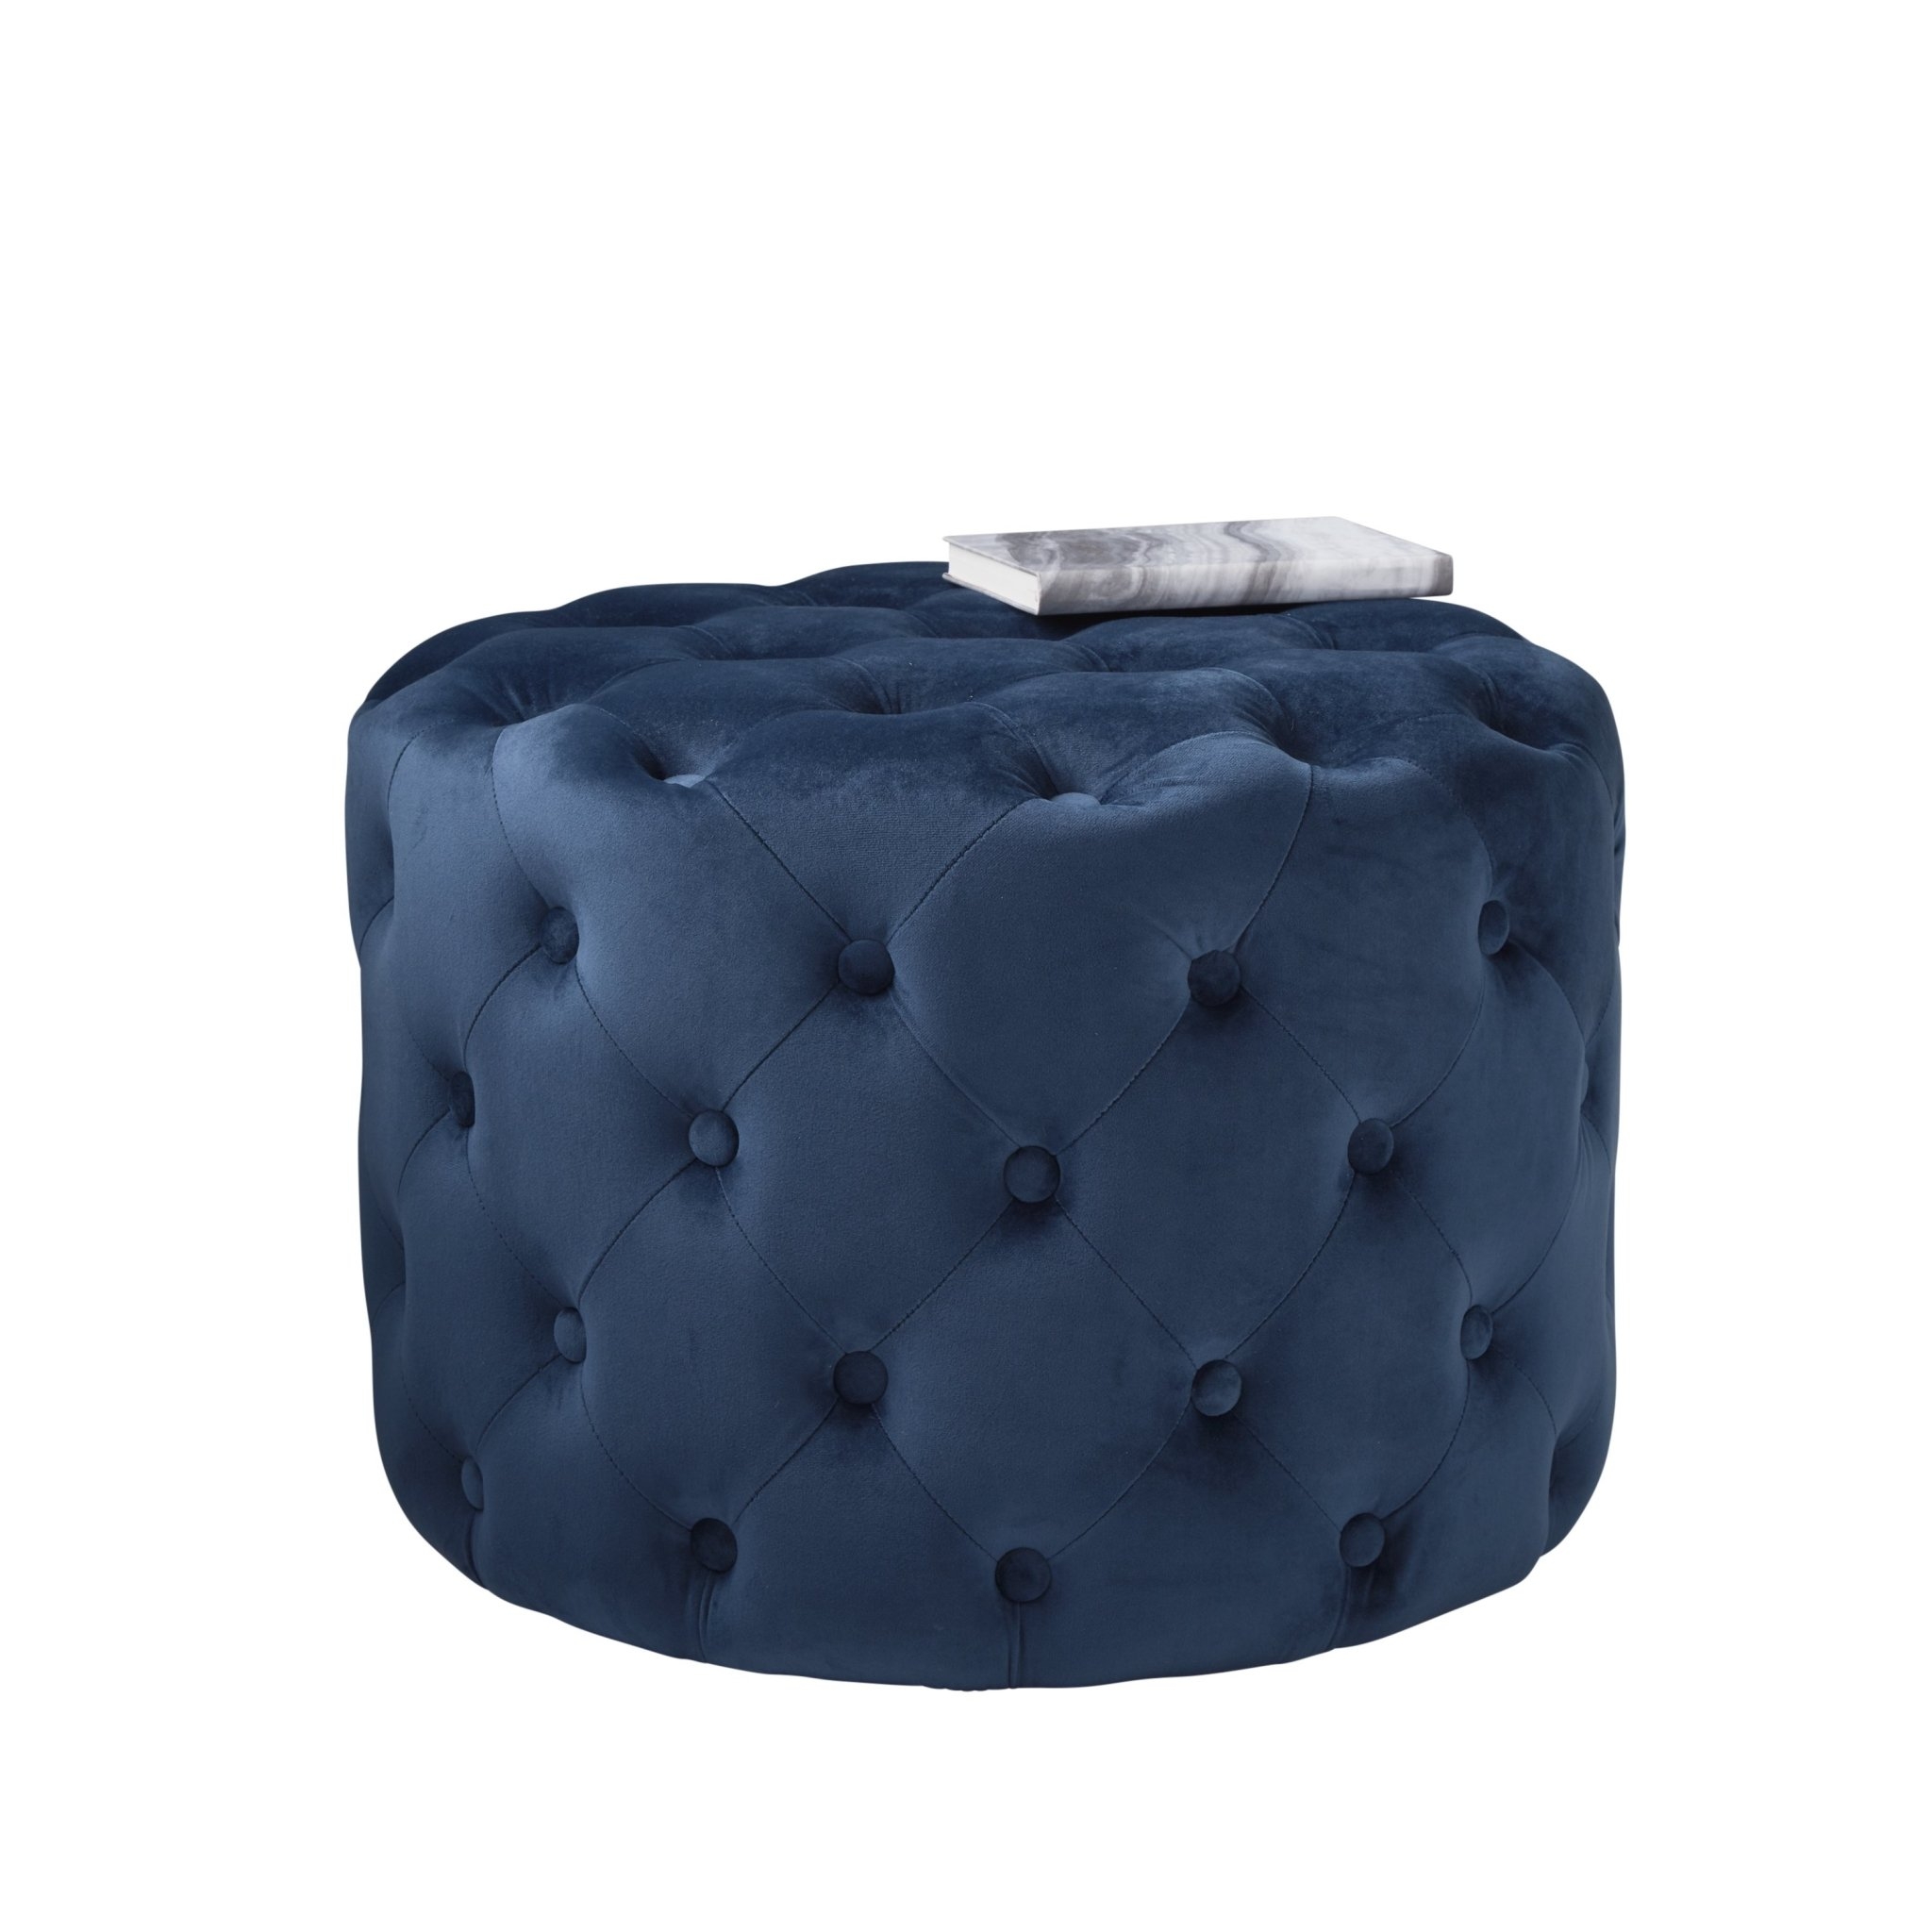 Native Home & Lifestyle Pouffe in Blue Tufted Velvet 60 x 60 x 42cm – Furniture & Homeware – The Luxe Home